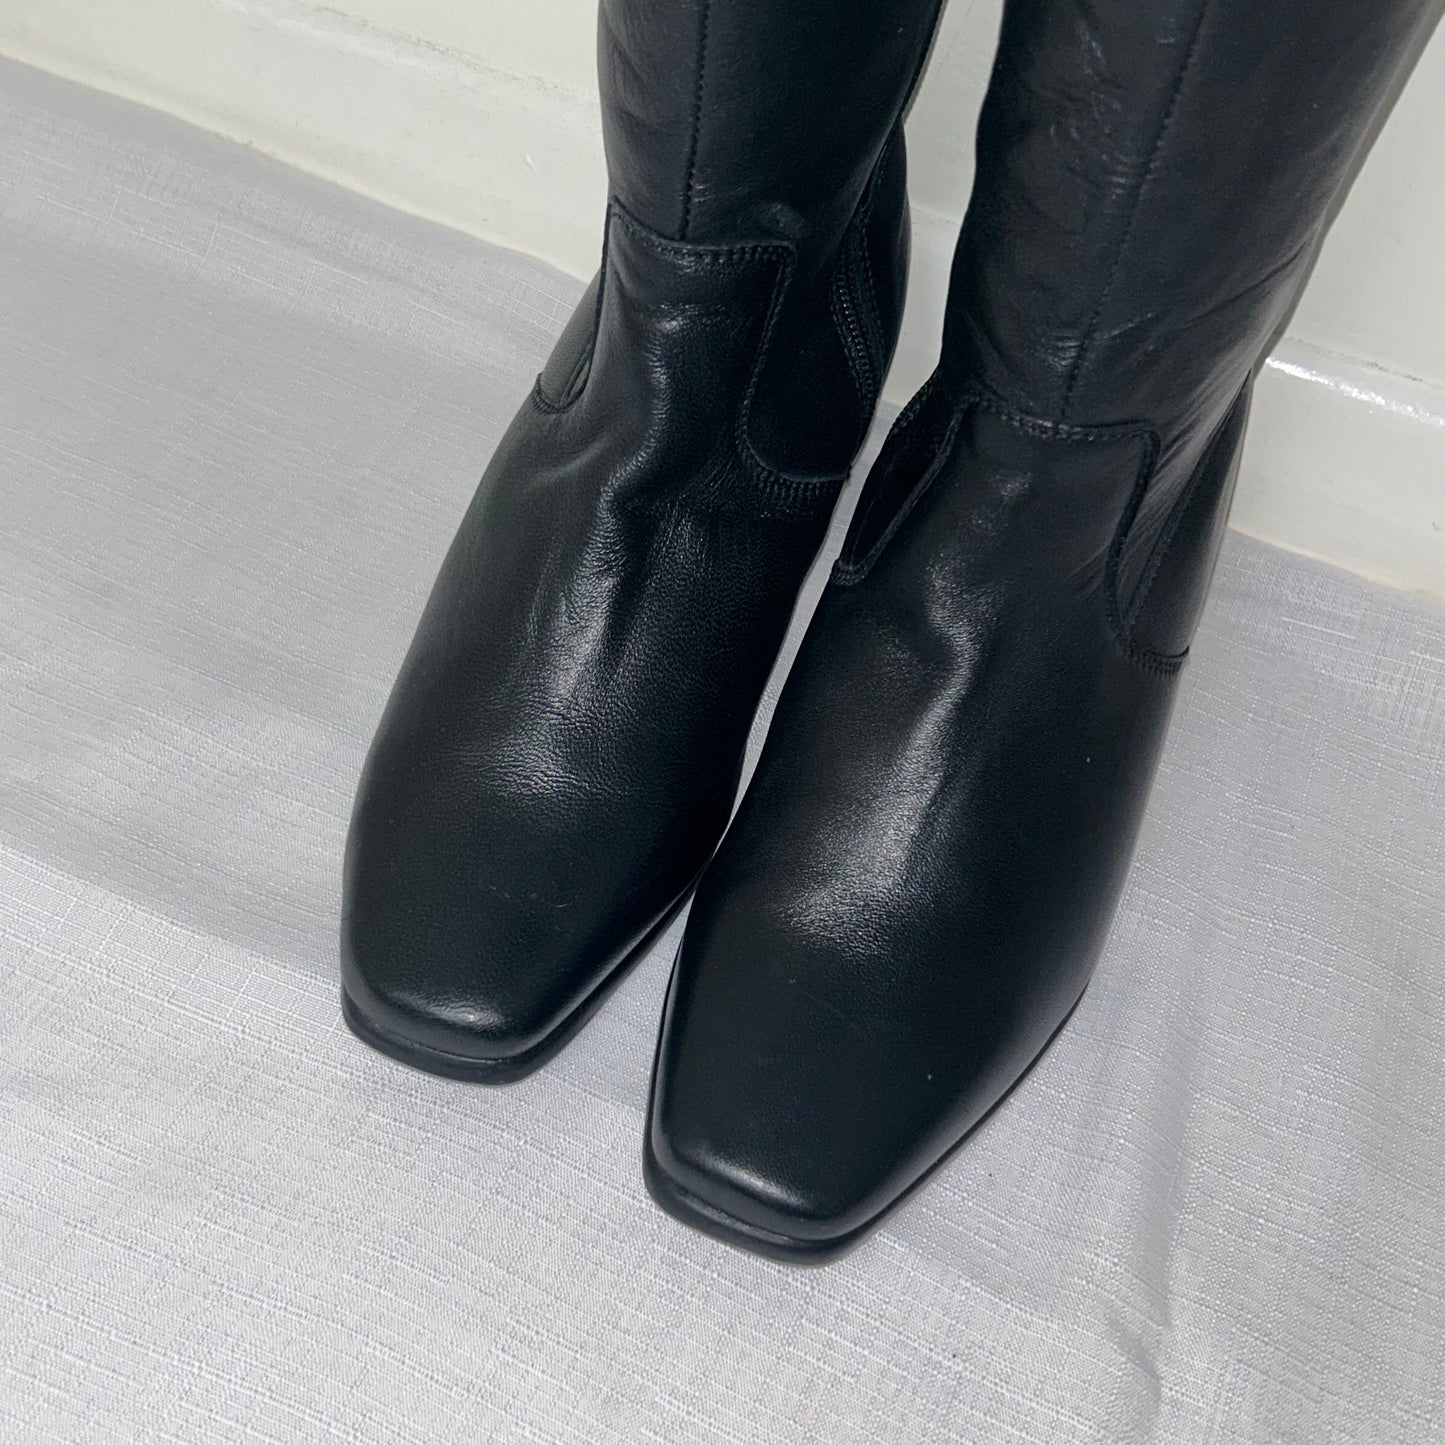 toes of black knee high buckle boots shown on a white background